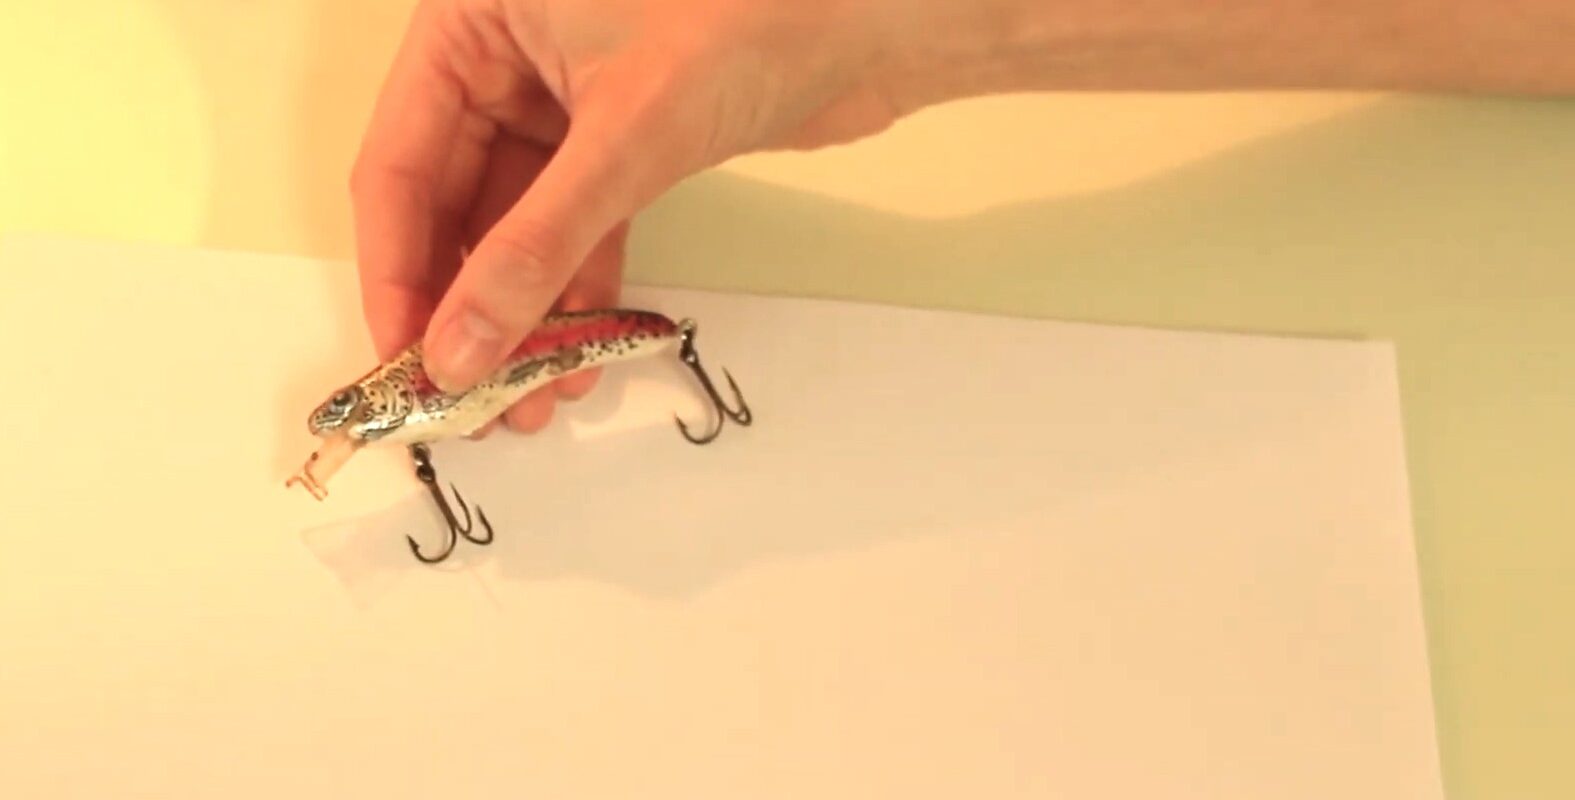 Video lessons on fishing lures, hooks and tackle boxes.